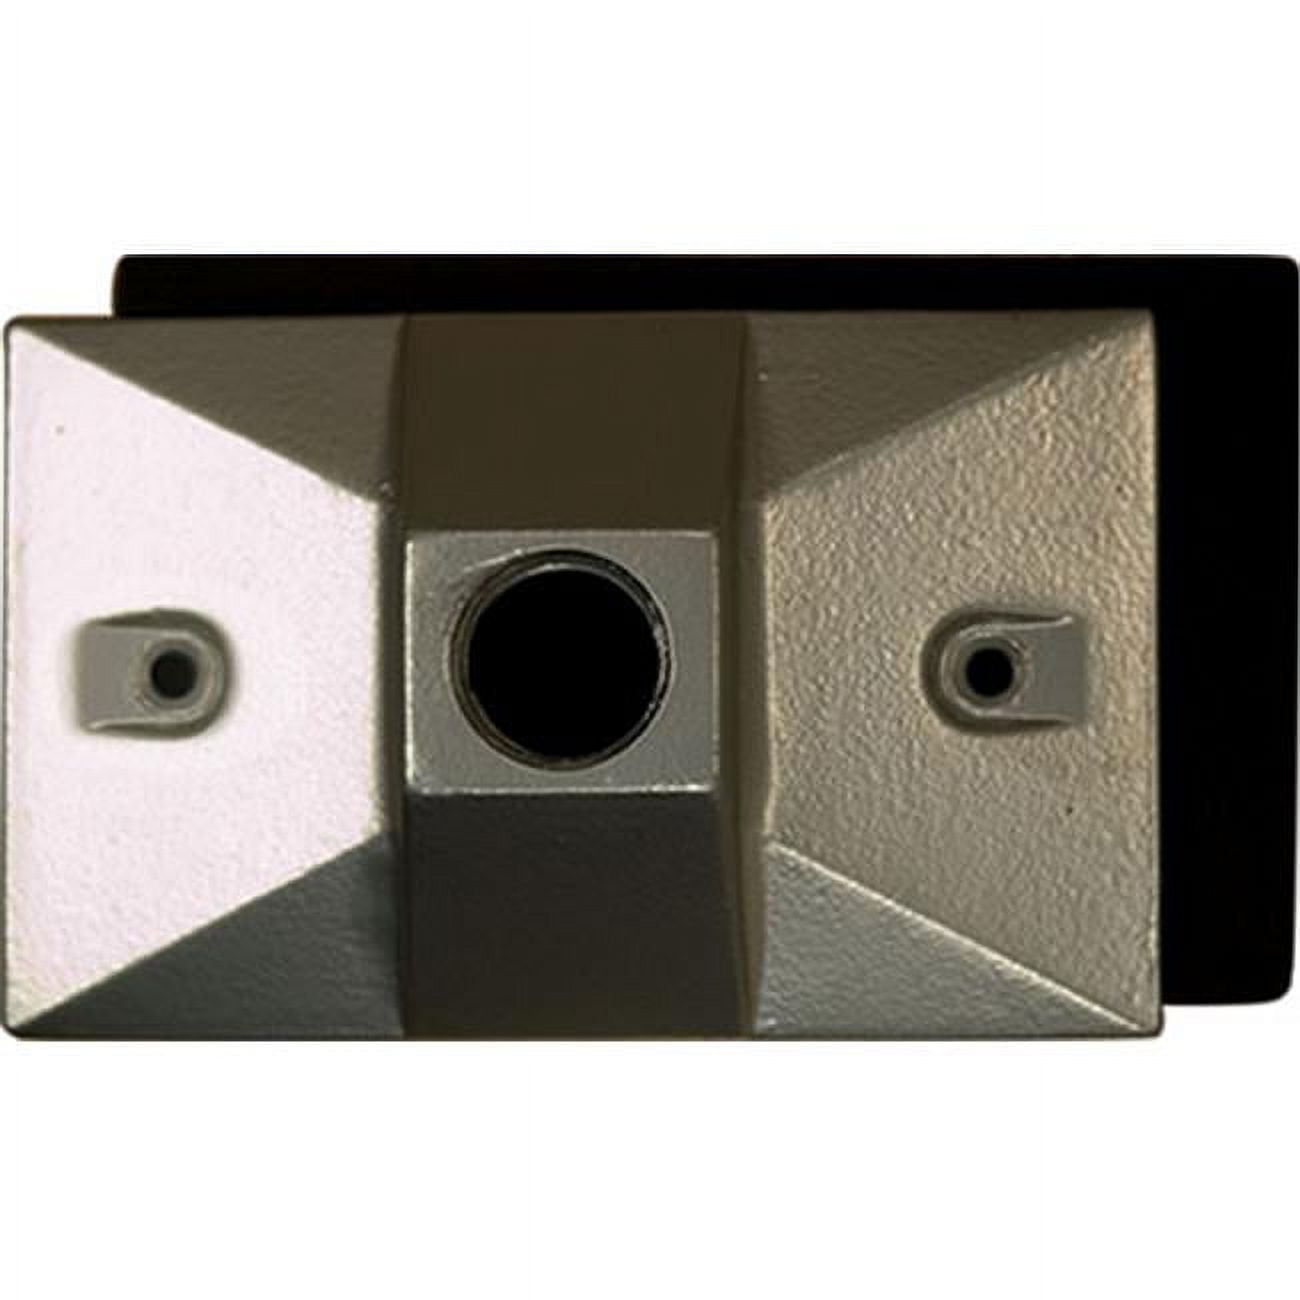 P-12 Rectangular Box Cover With One 0.5 In. Hole, Gray